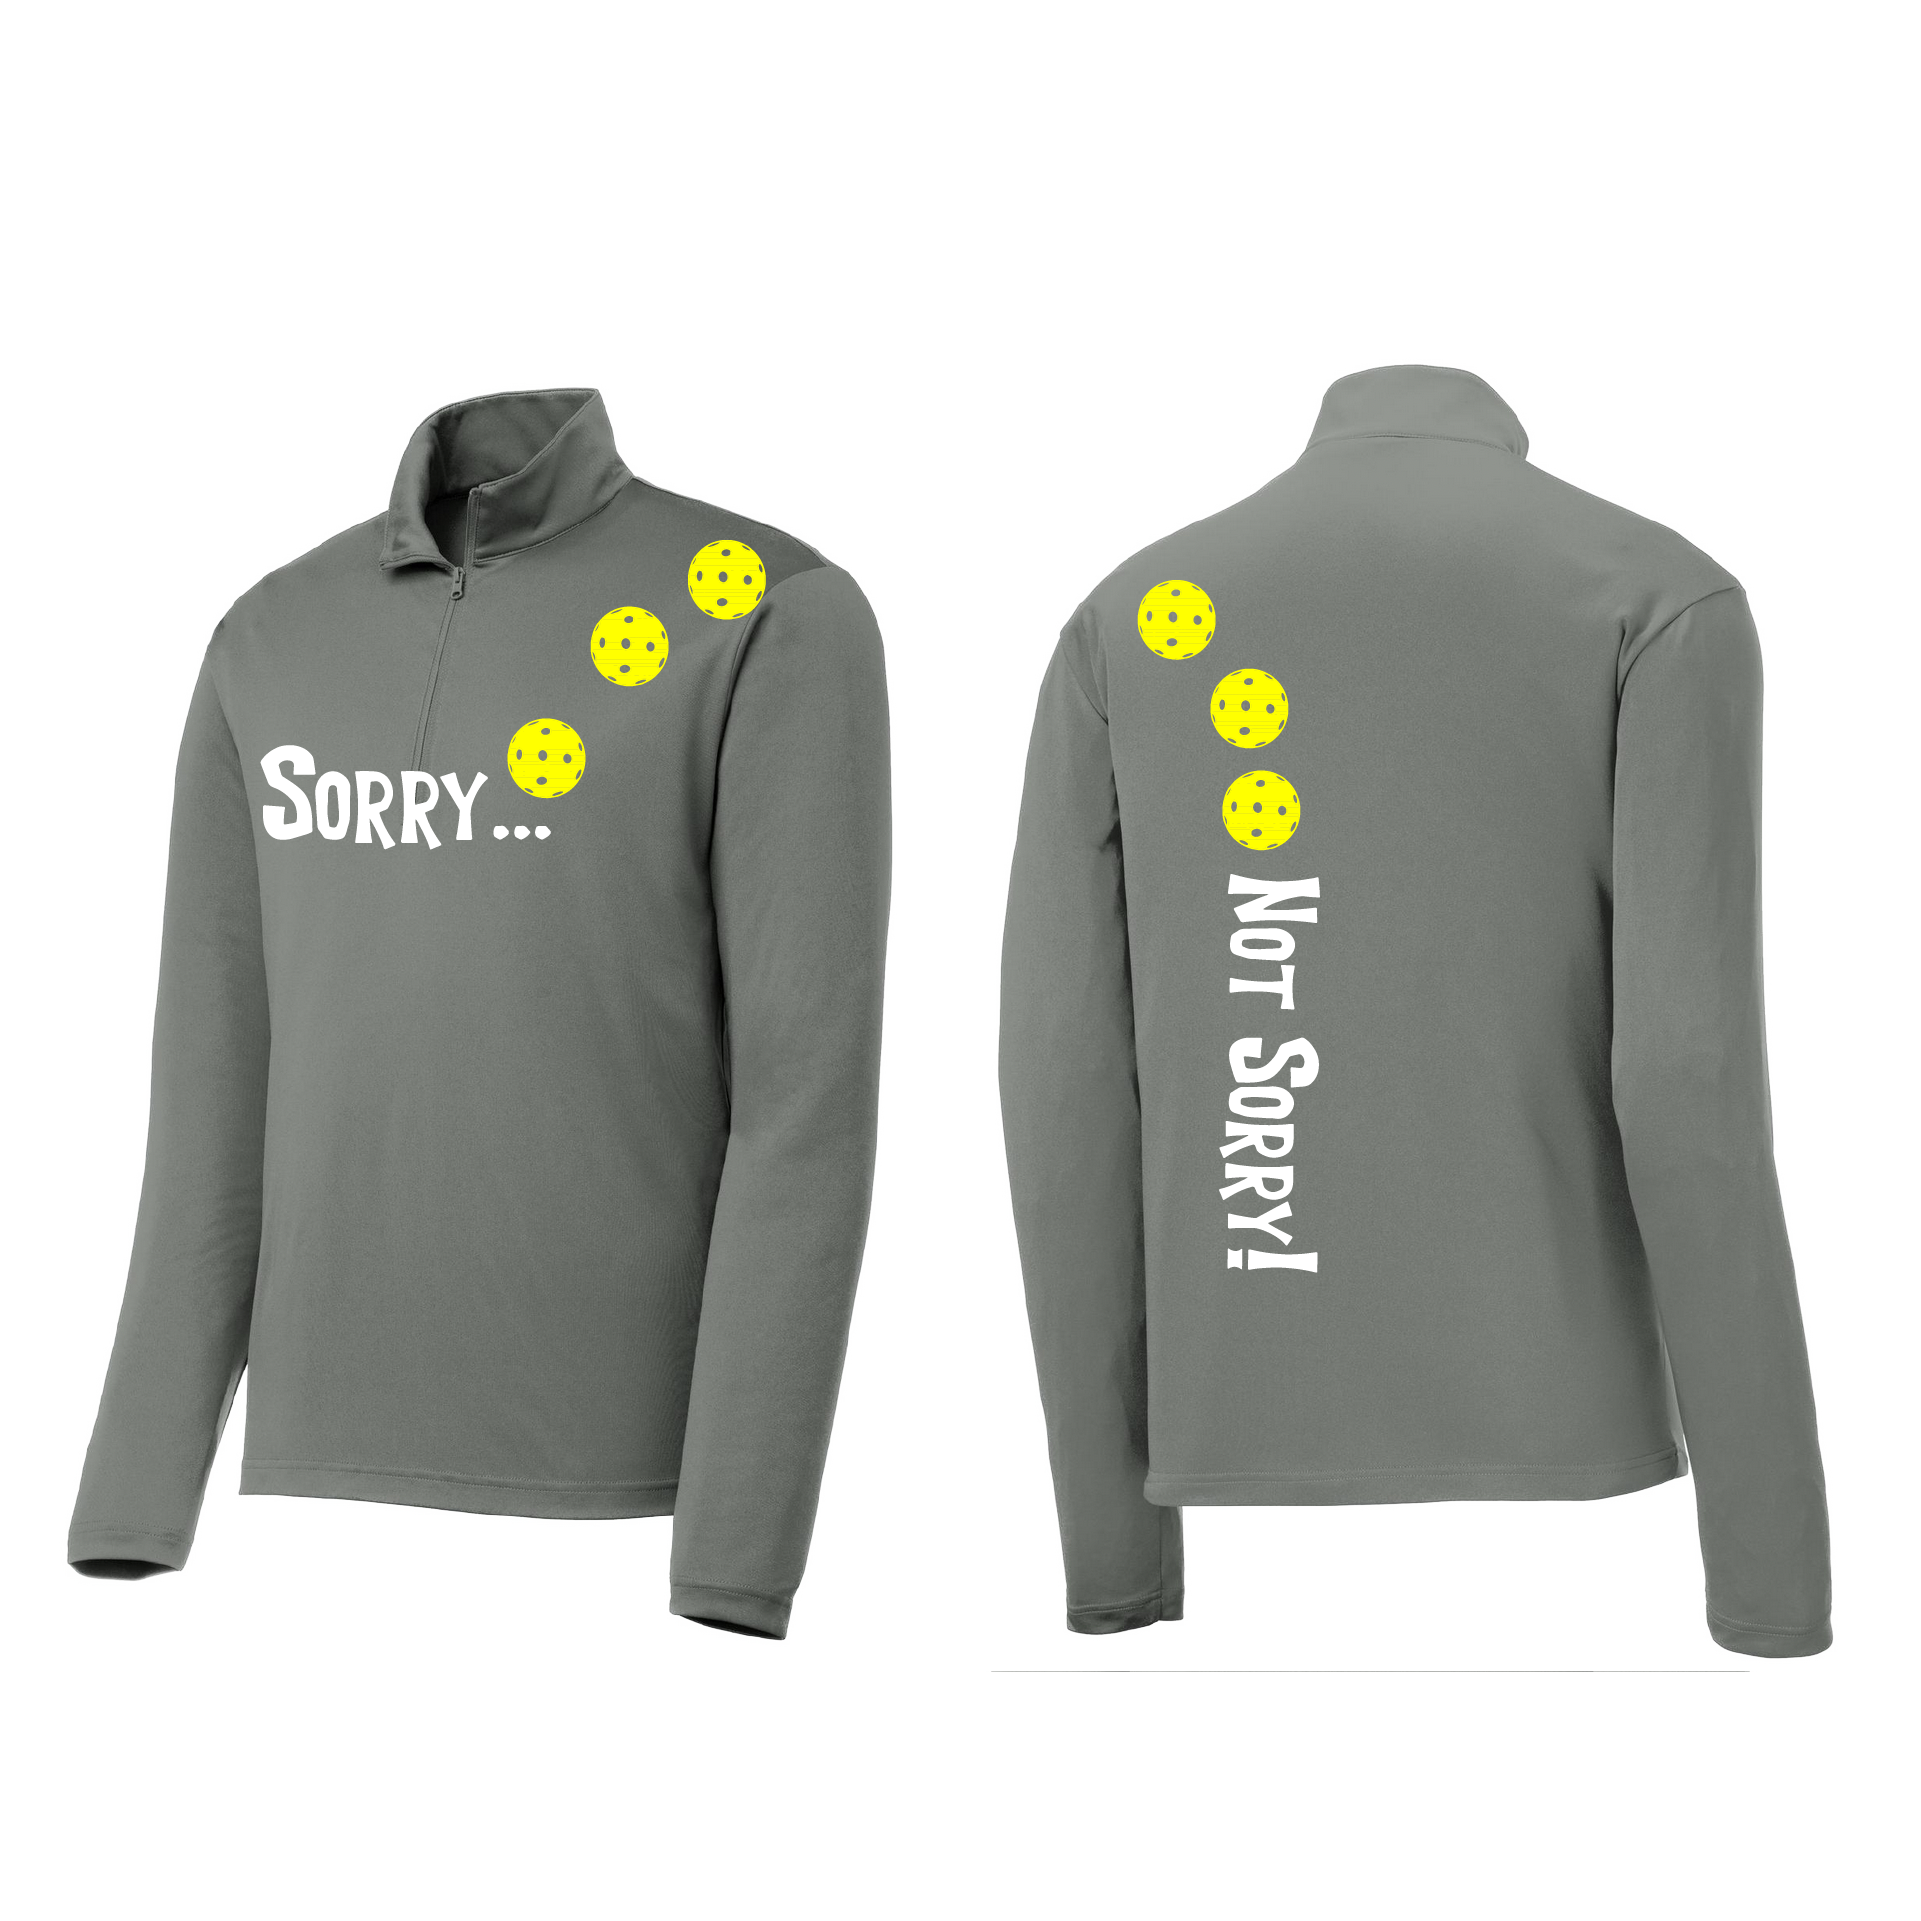 Pickleball Design: Sorry... Not Sorry Customizable Pickleball colors: White, Green; Yellow or Pink Balls Men’s 1/4 Zip Pullover-8 Ball Colors Turn up the volume in this Men's shirt with its perfect mix of softness and attitude. Material is ultra-comfortable with moisture wicking properties and tri-blend softness. PosiCharge technology locks in color. Highly breathable and lightweight. Versatile enough for wearing year-round.